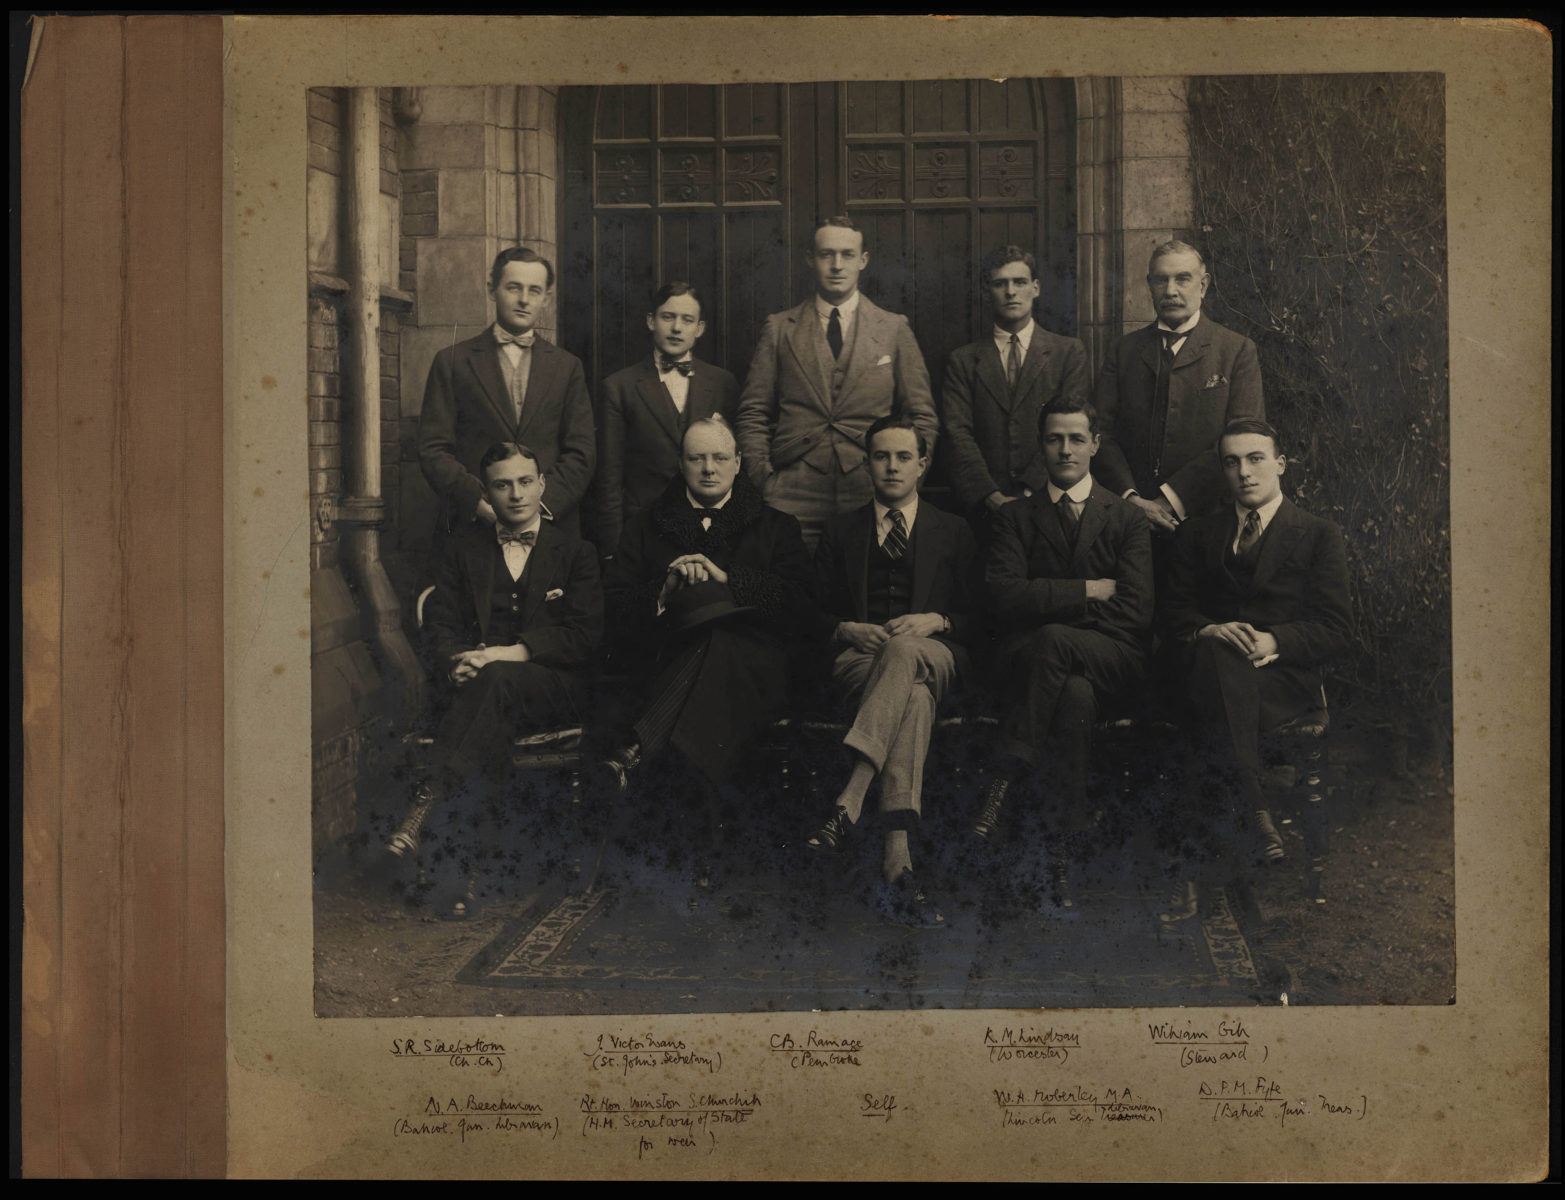 Photographer unknown. Group portrait, including Beverley Nichols, S. R. Sidebottom, J. Victor Evans, C. B. Ramage, R. M. Lindsay, William Gib, N. A. Beechman, Rt. Hon. Winston S. Churchill, W. H. [Noberly] M. A., D. P. M. Fyfe, circa 1920-1930.  Process: Smooth, matte gelatin silver print, on a gray-green paper board album page